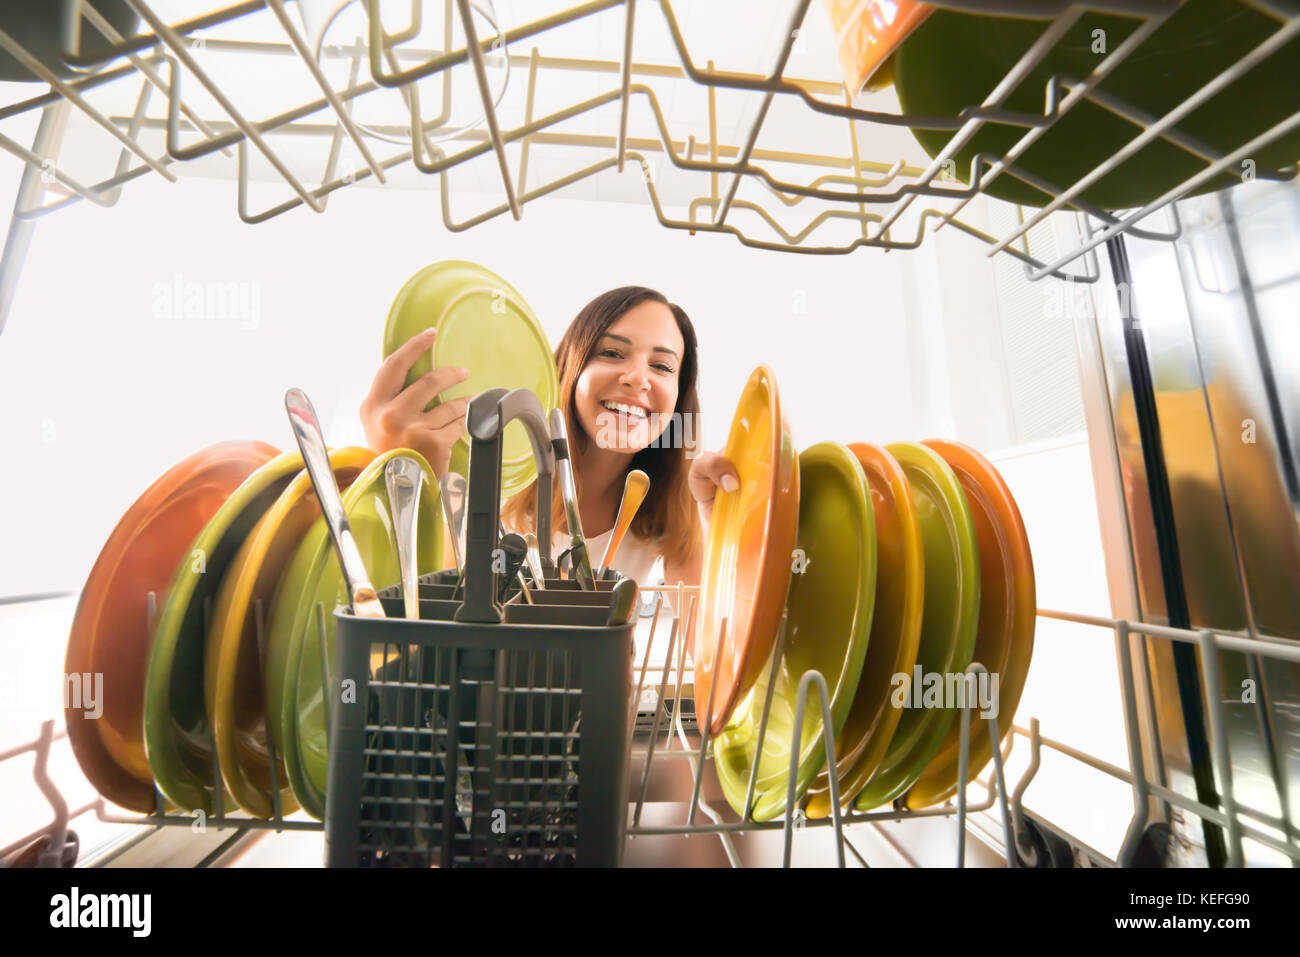 Young Happy Woman Arranging Plates In Dishwasher Stock Photo